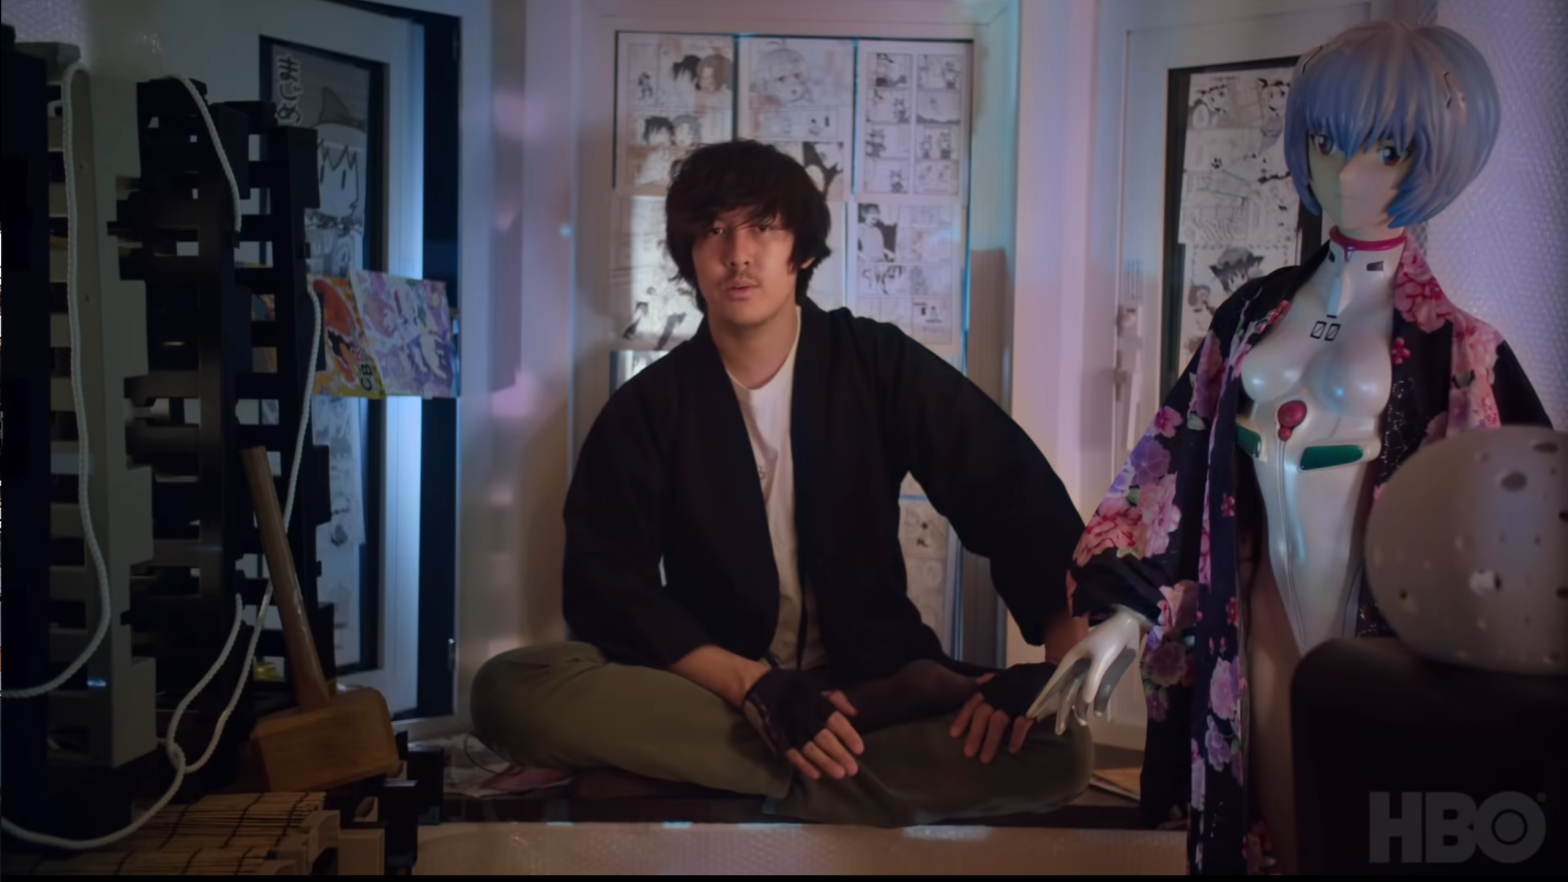 Ron Watkins, the former administrator of fringe message board 8chan and possible candidate for Congress, seen here alongside his life-sized Evangelion doll that is possibly a sex toy. (Screenshot: HBO / Q: Into the Storm / YouTube, Fair Use)